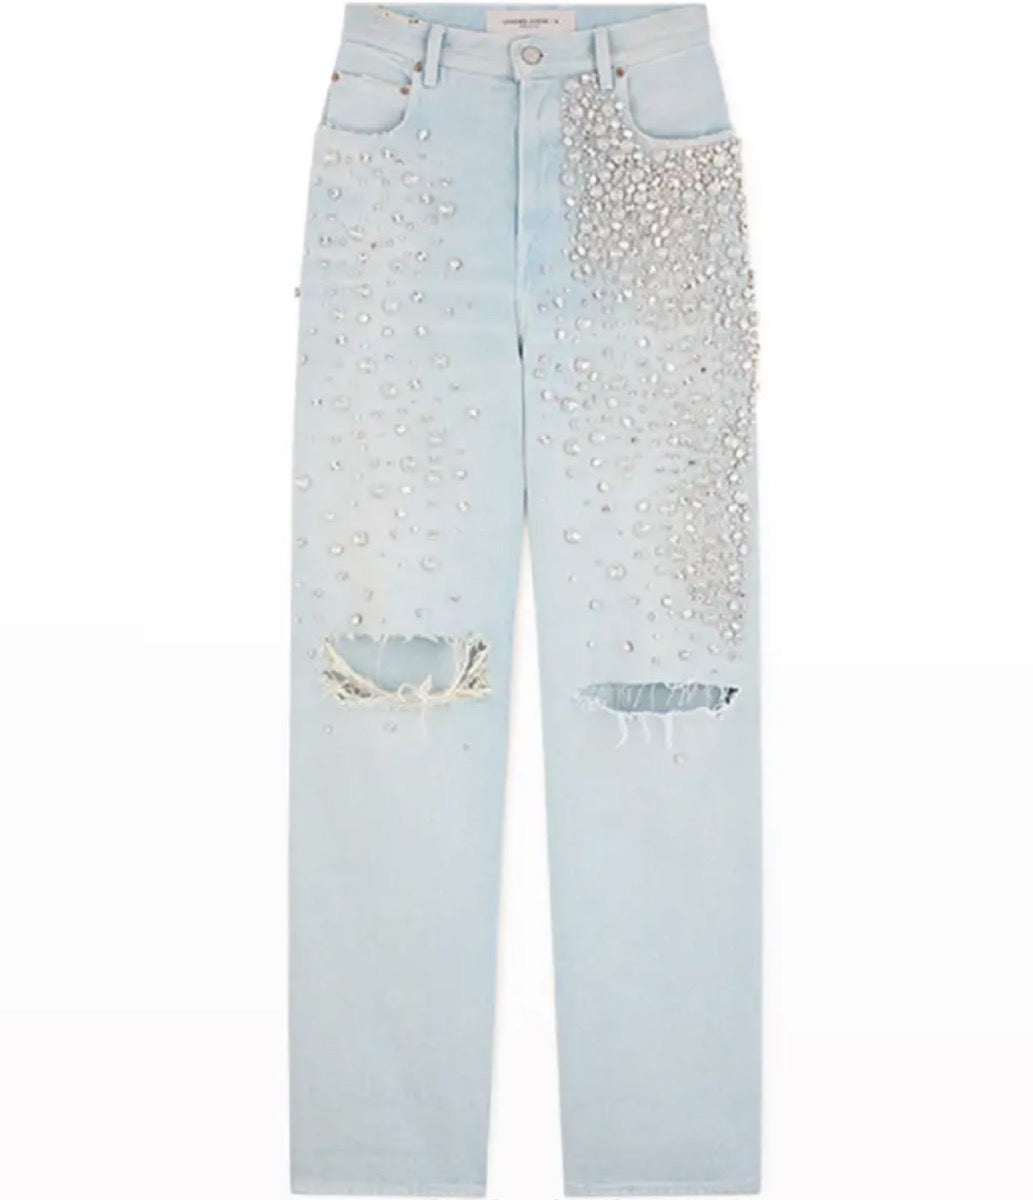 G diamond washed jeans- from LA